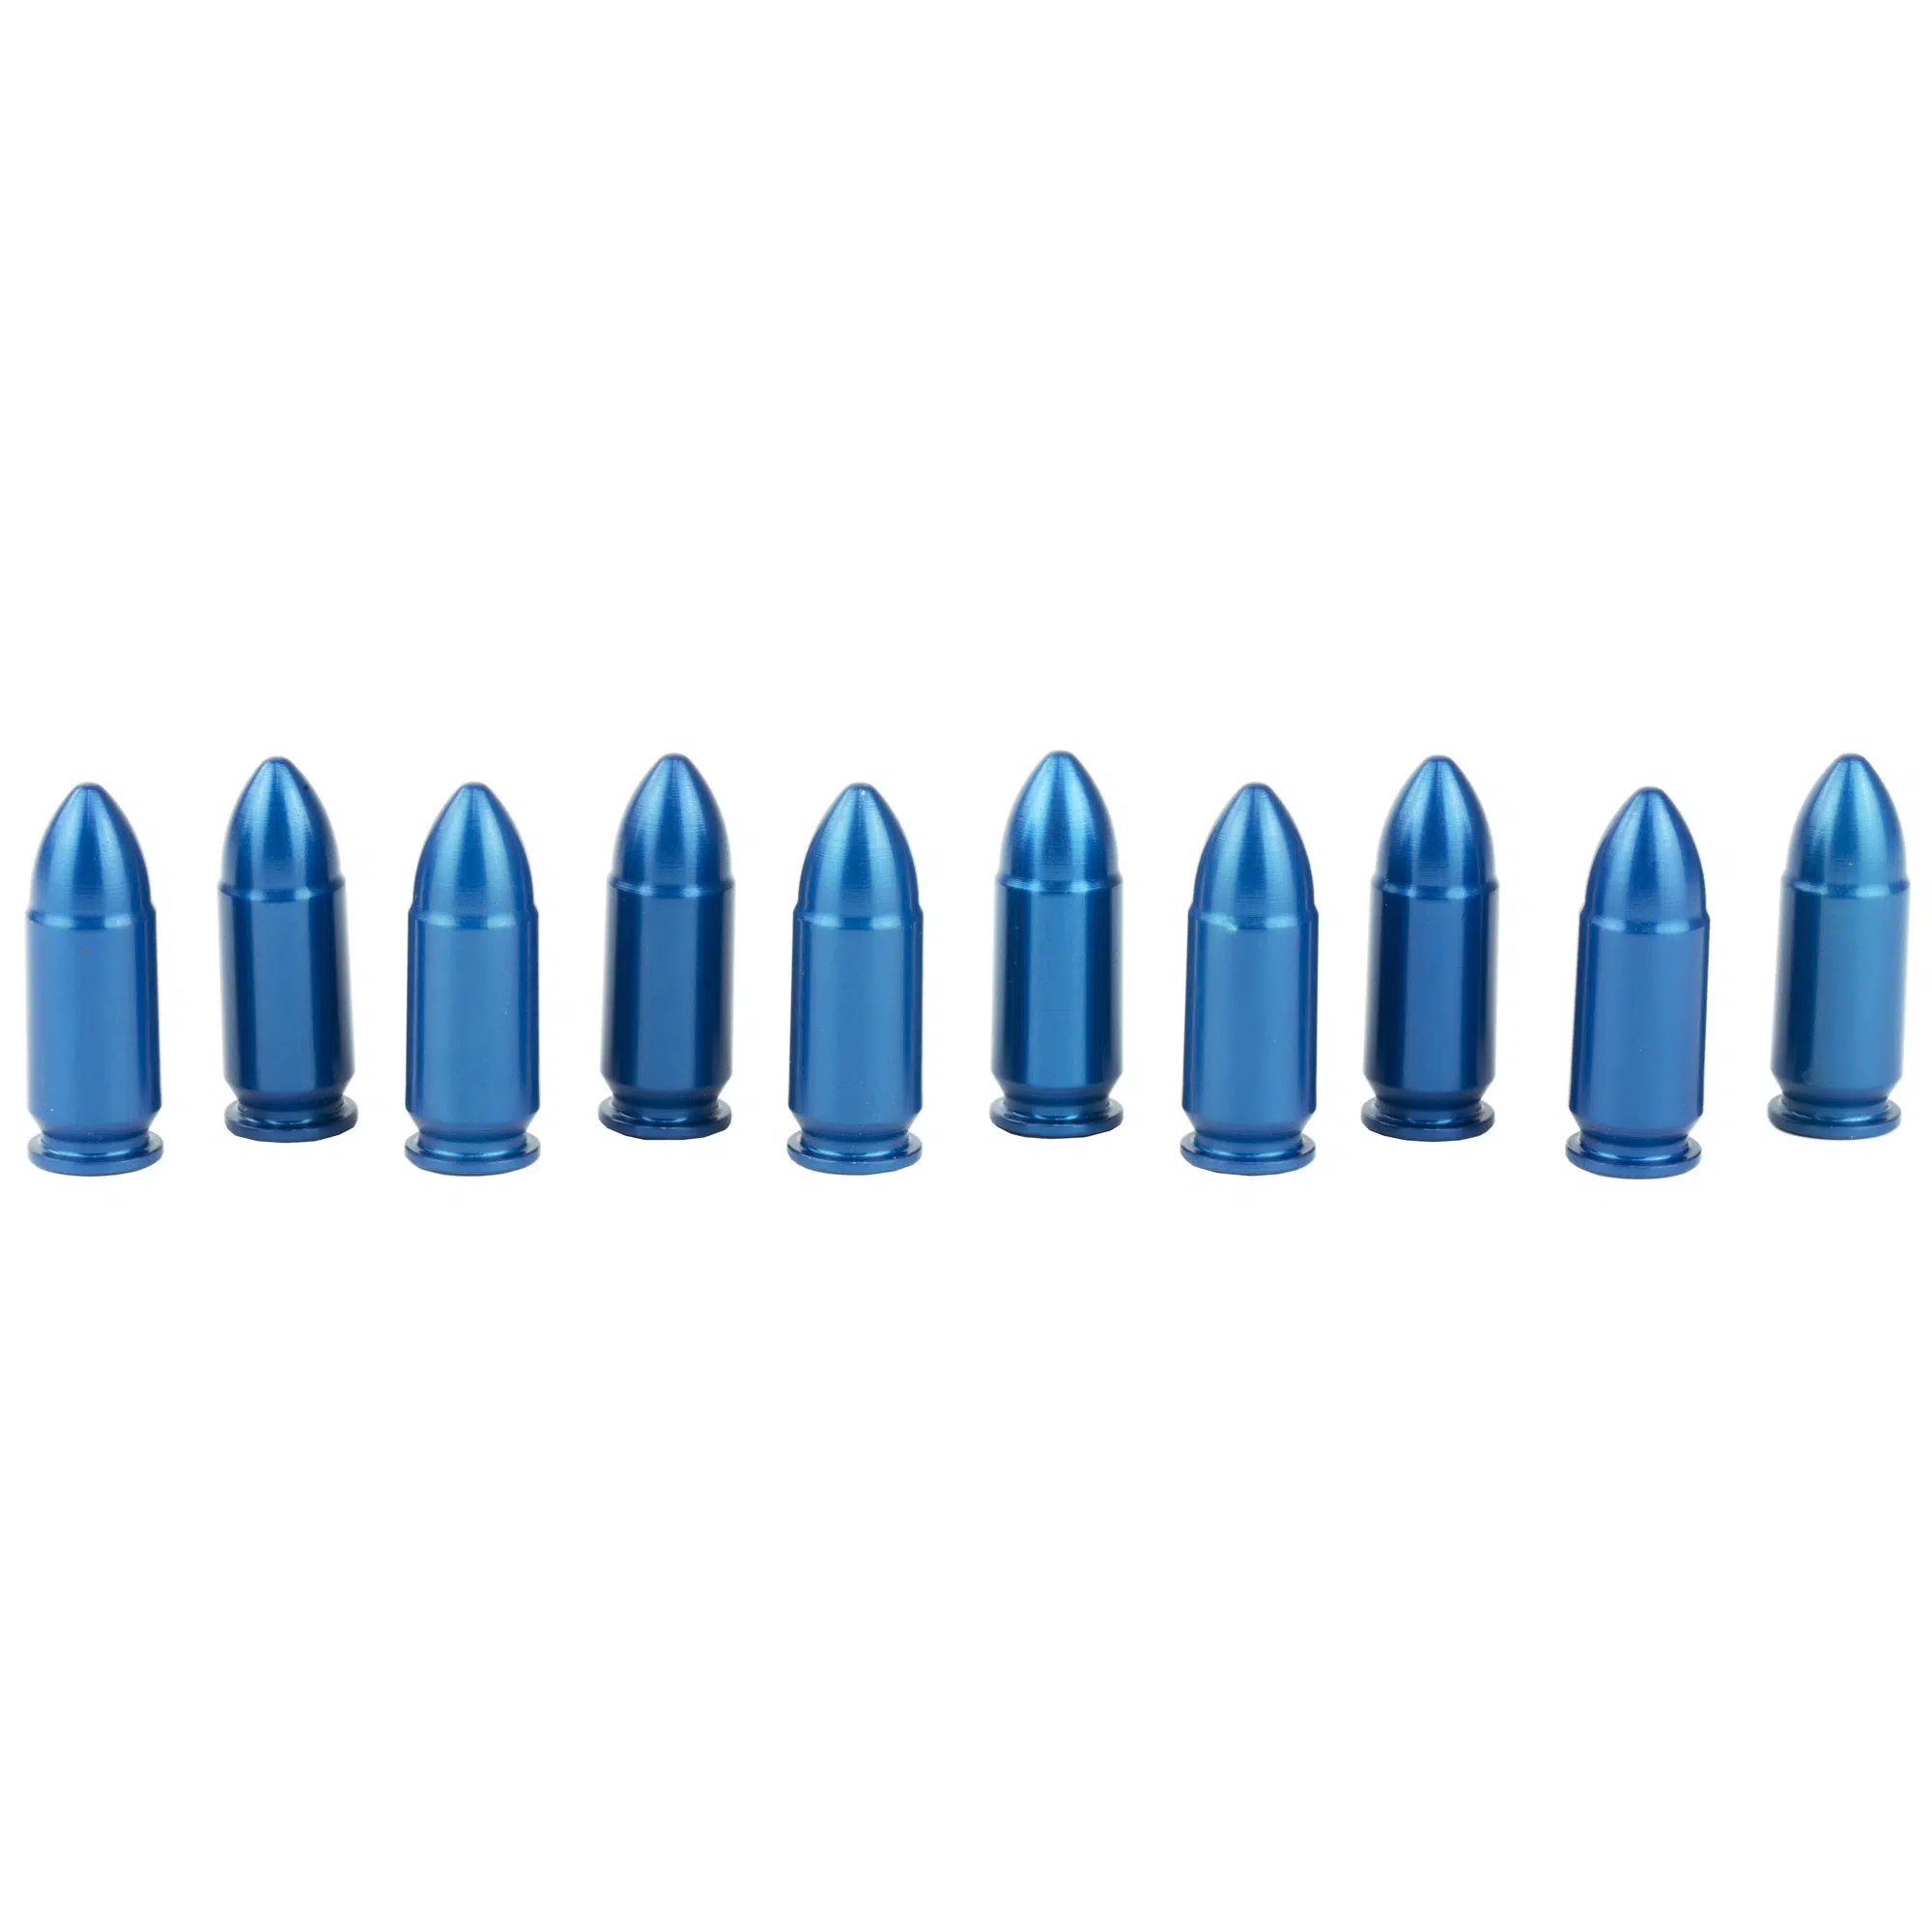 A-Zoom Pistol Snap Caps - Dummy Rounds for Various Calibers - 10-Pack